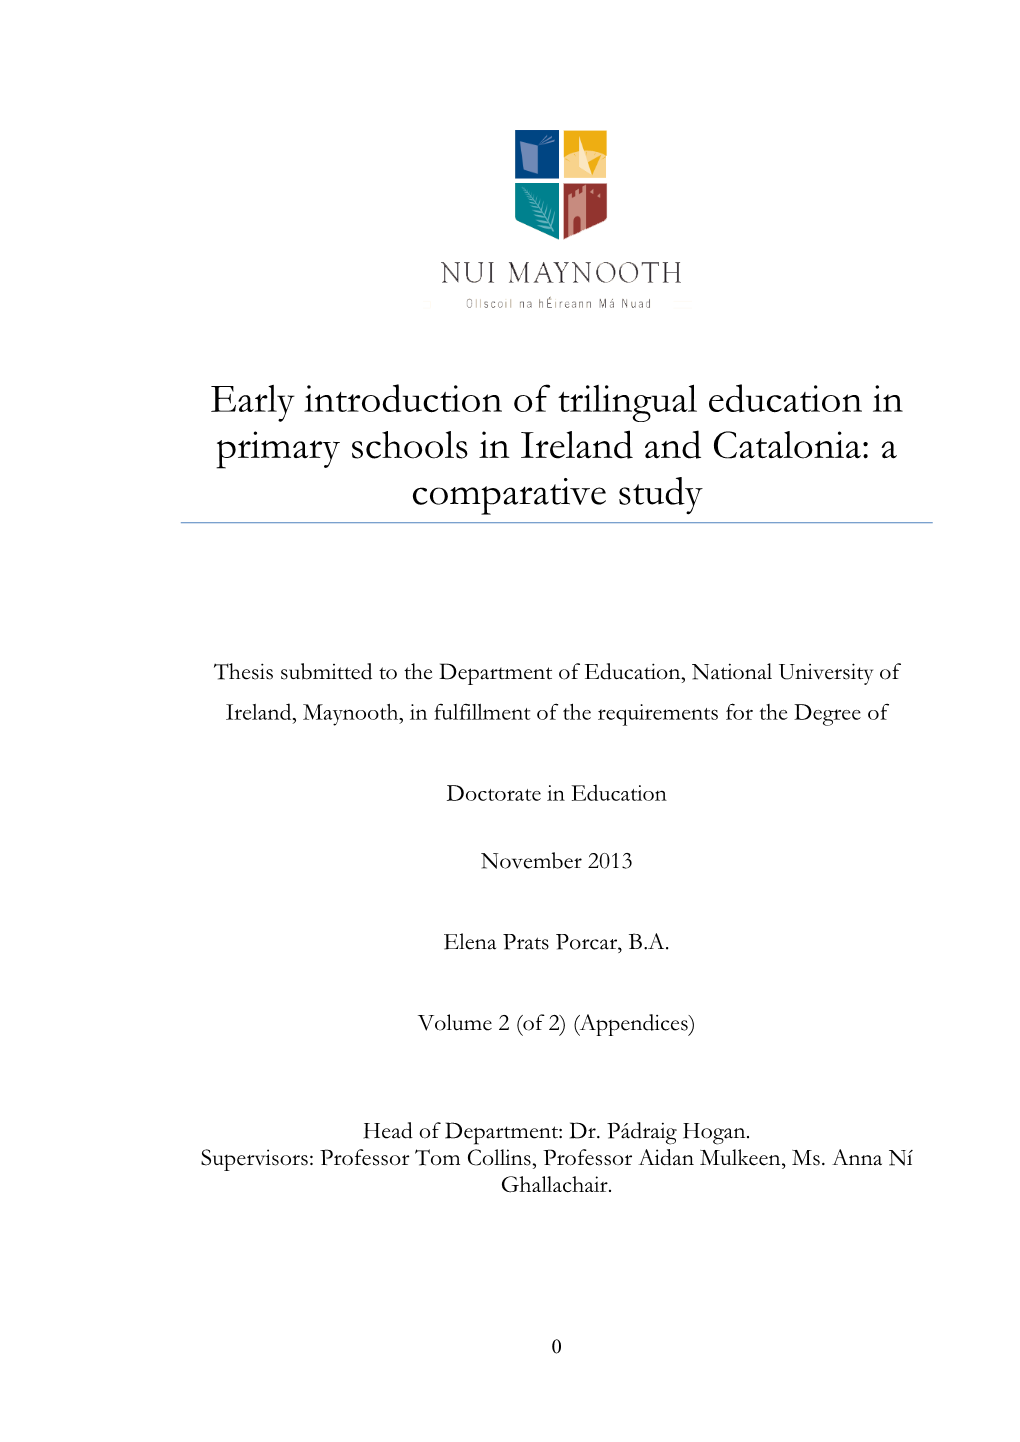 Early Introduction of Trilingual Education in Primary Schools in Ireland and Catalonia: a Comparative Study